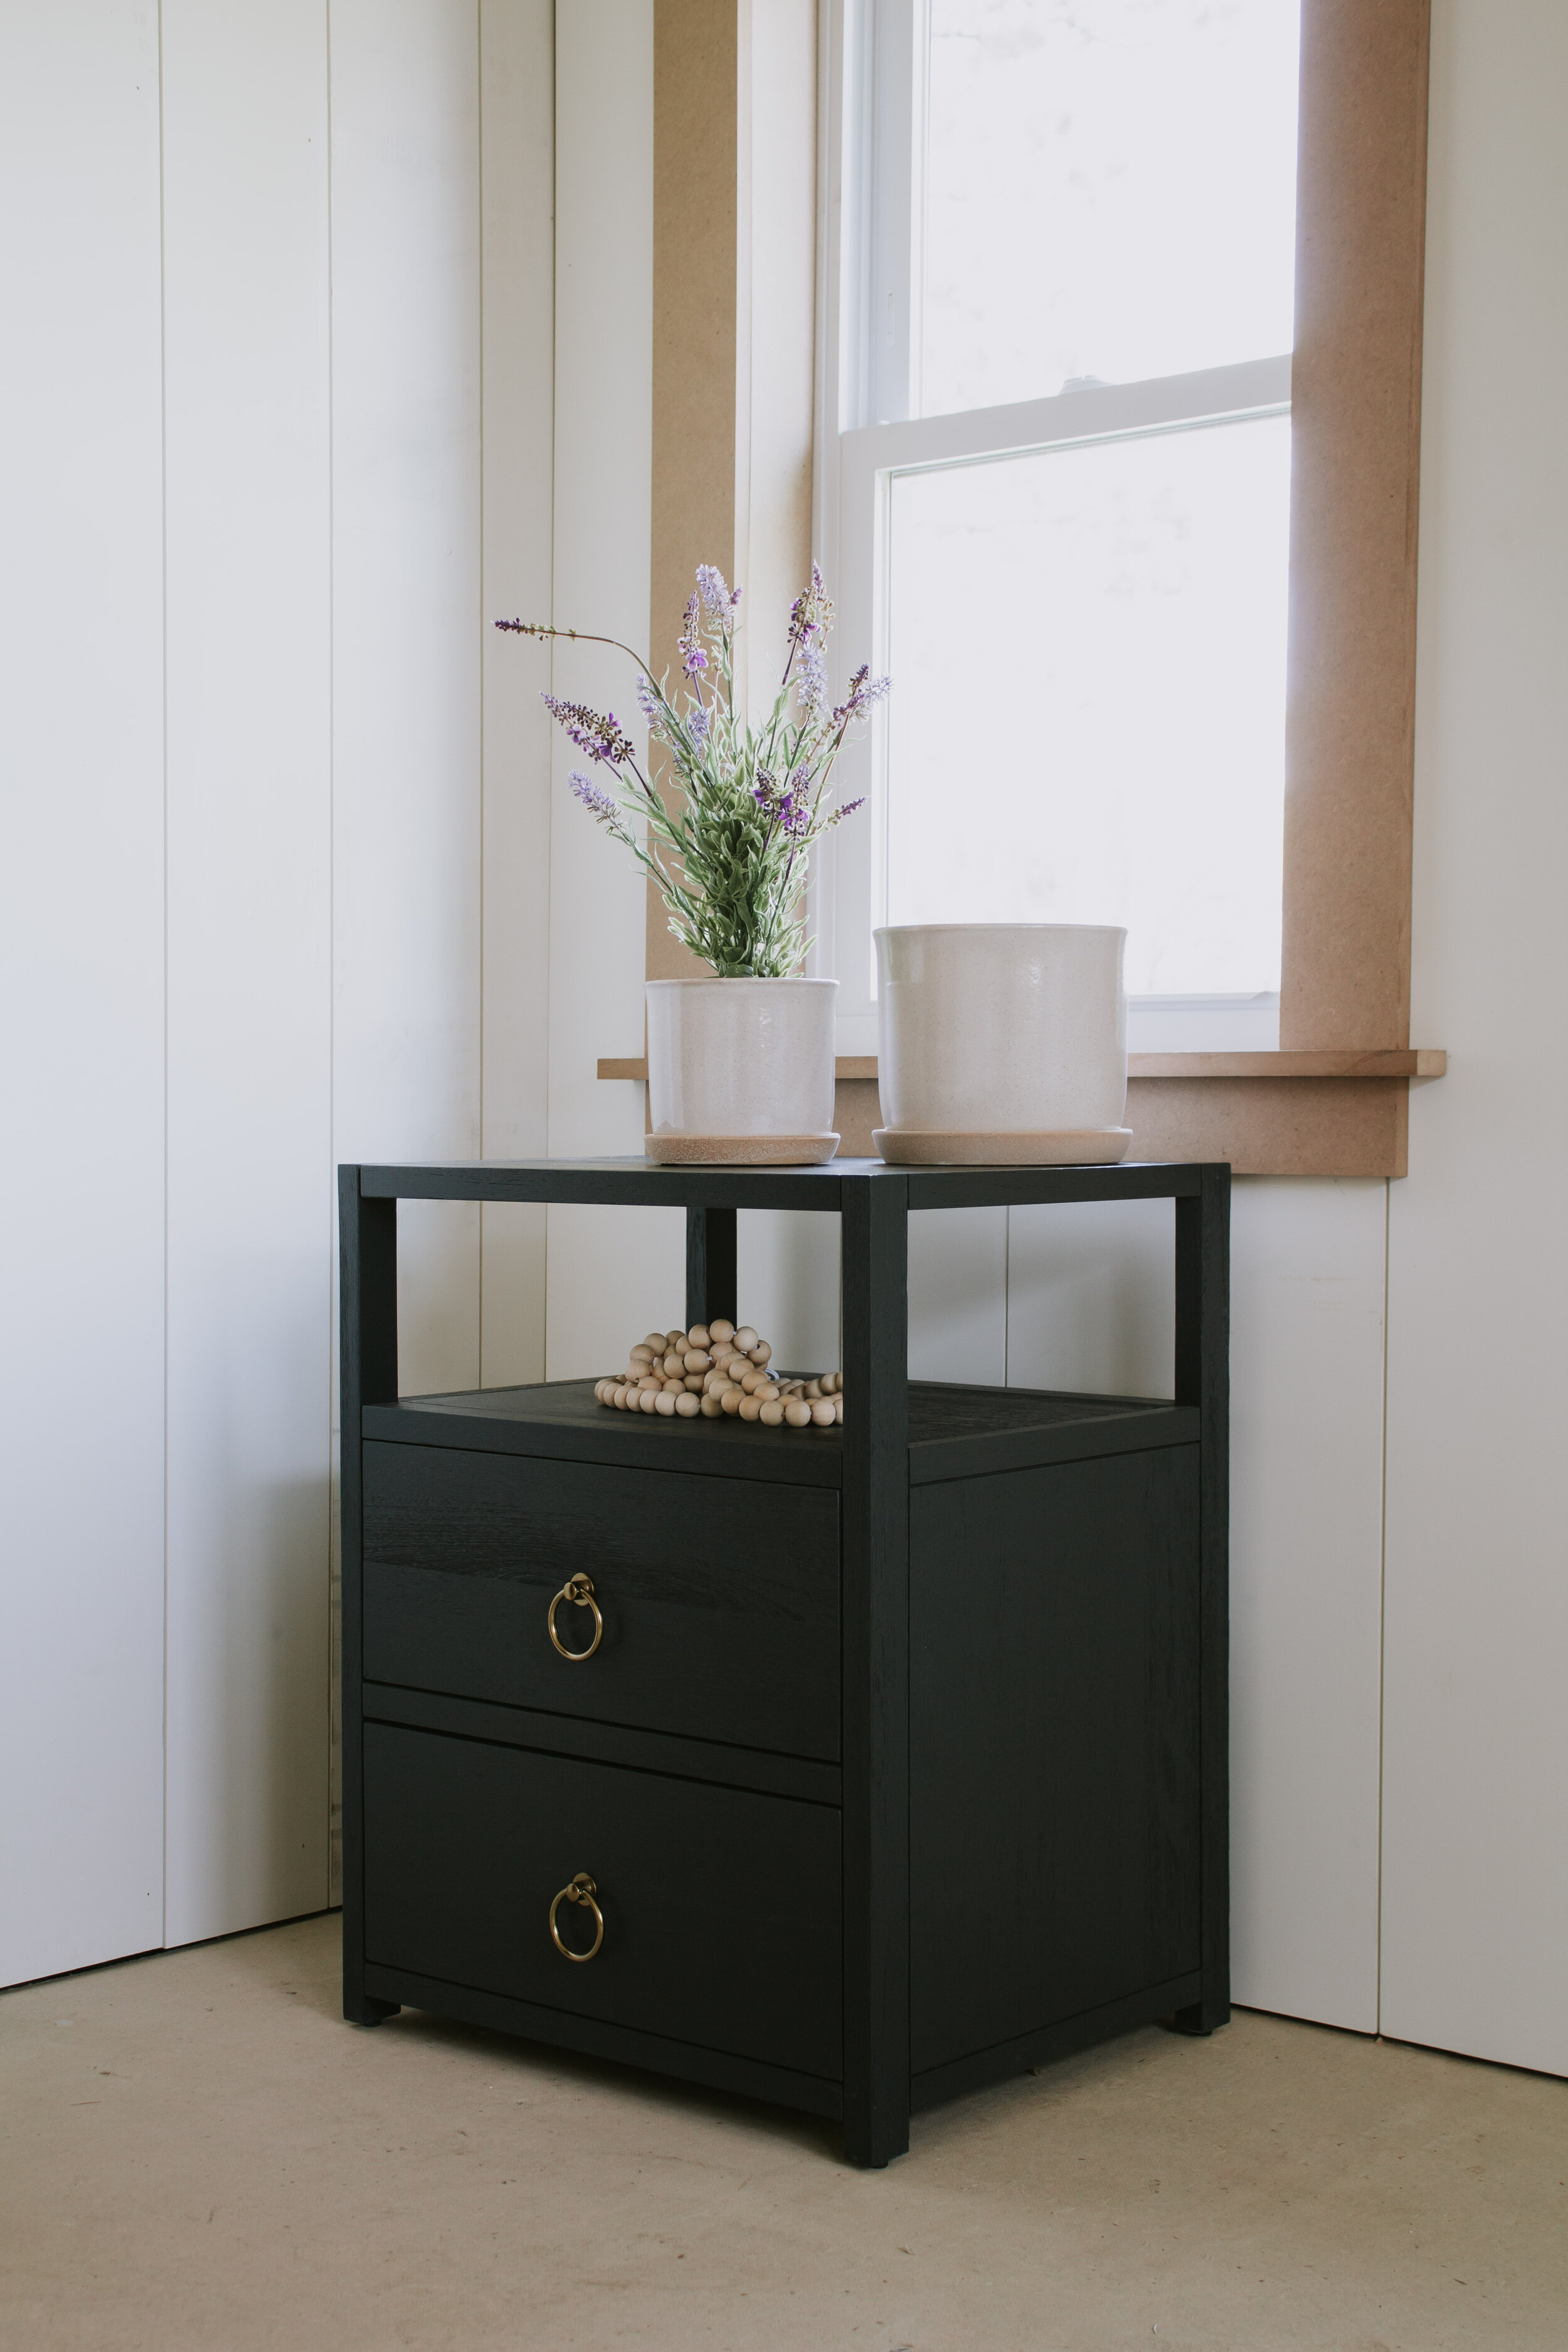 Joss & Main Sale of the season, the nightstands and decor I bought for our bedroom, & my top picks from Joss & Main | Nadine Stay